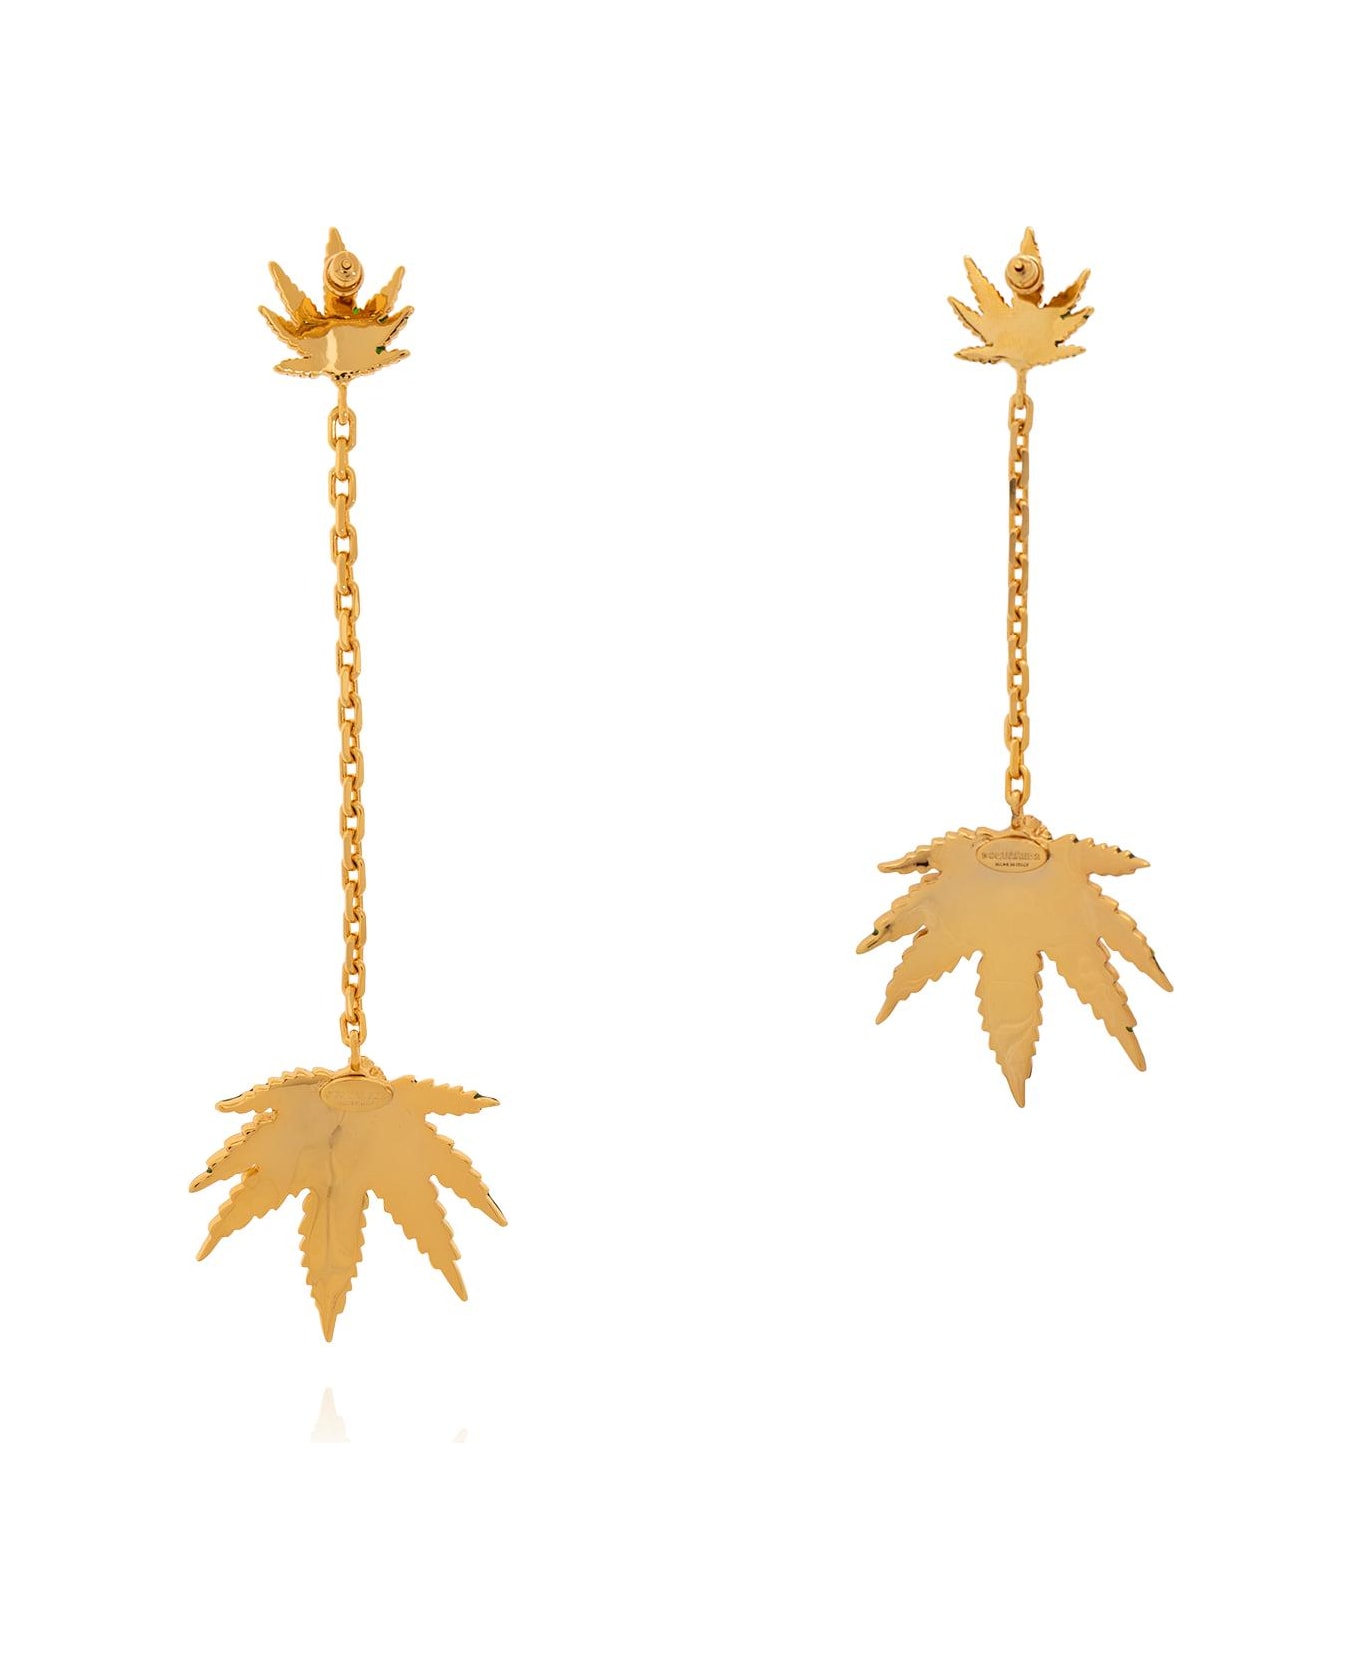 Dsquared2 Brass Earrings - Gold イヤリング